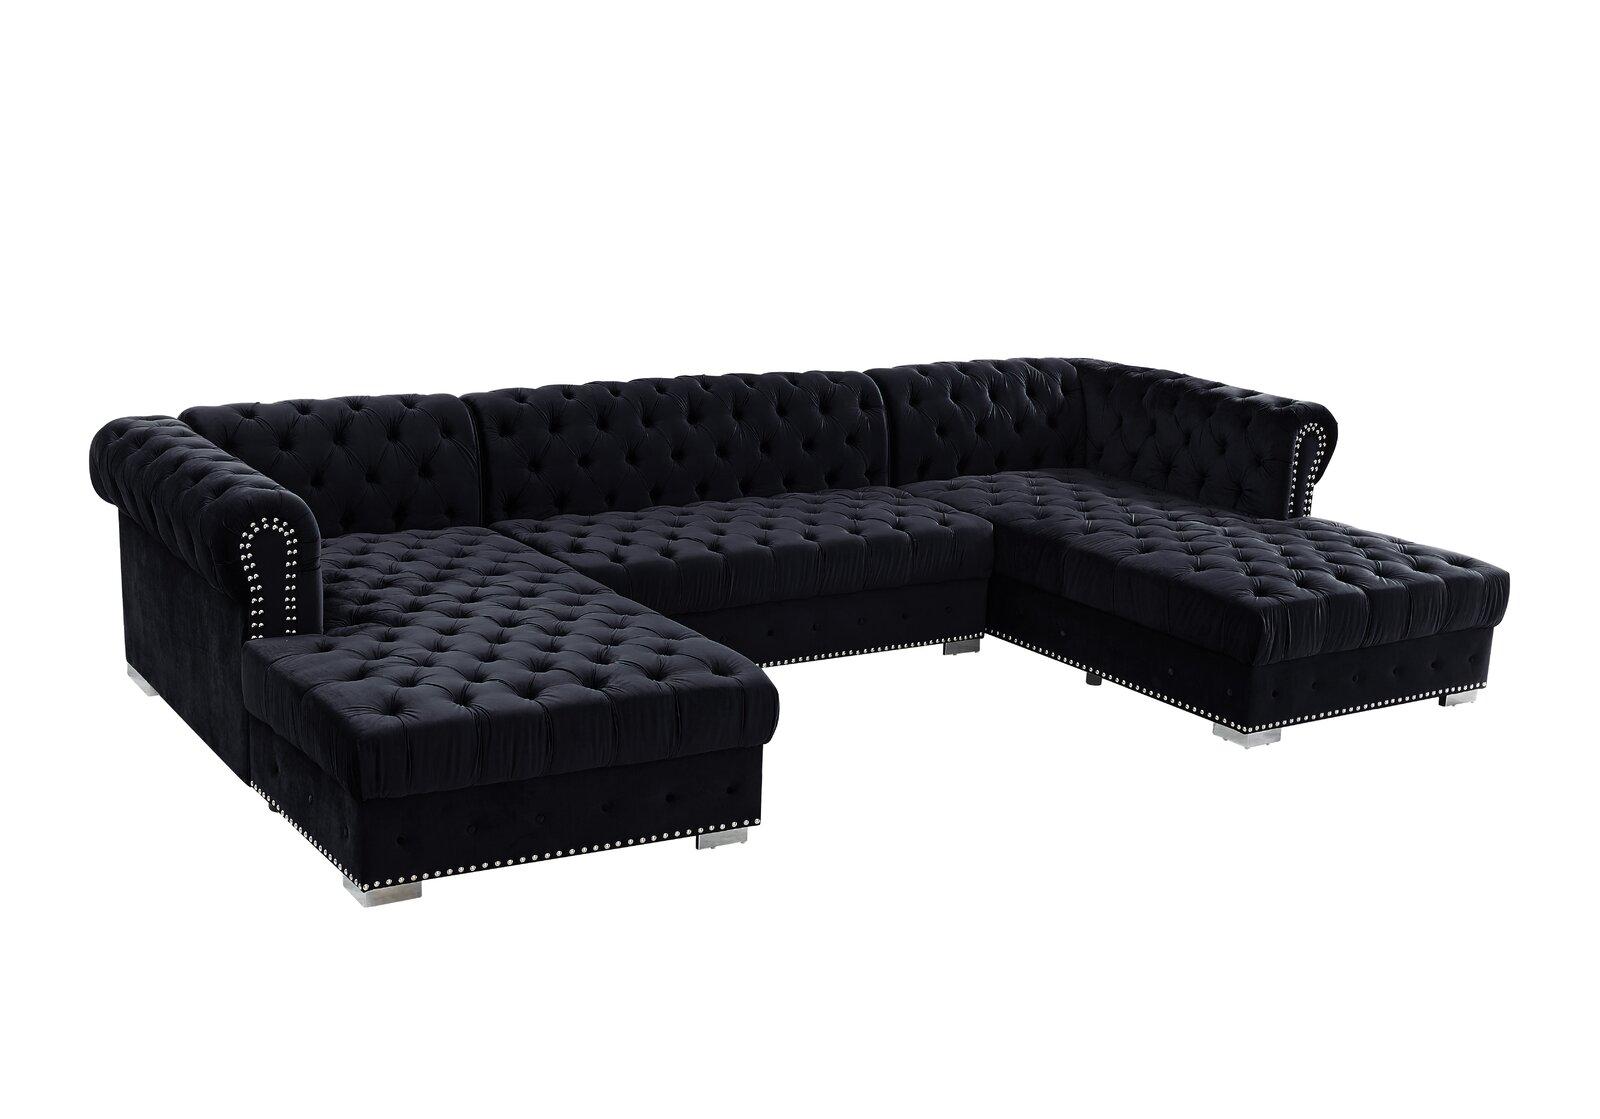 Contemporary, Modern Sectional Sofa MONALISA GHF-808857626141 in Black Fabric